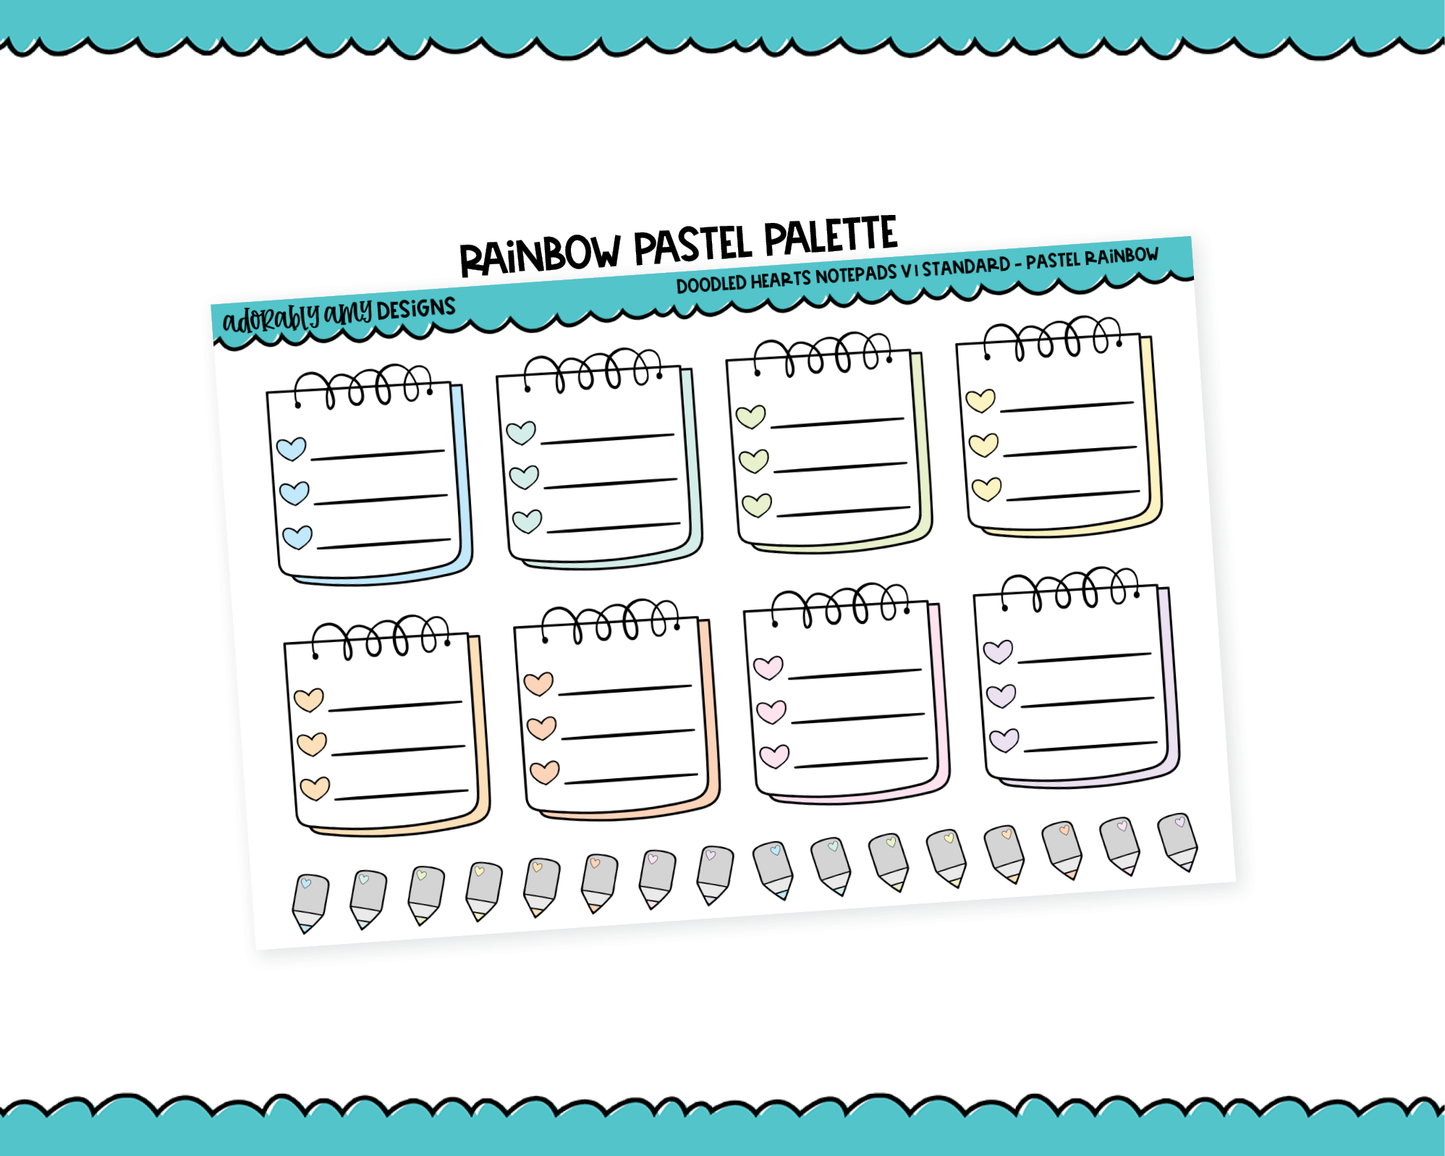 Rainbow Doodled Hearts Notepad V1 List Boxes Standard Size Stickers for any Planner or Insert